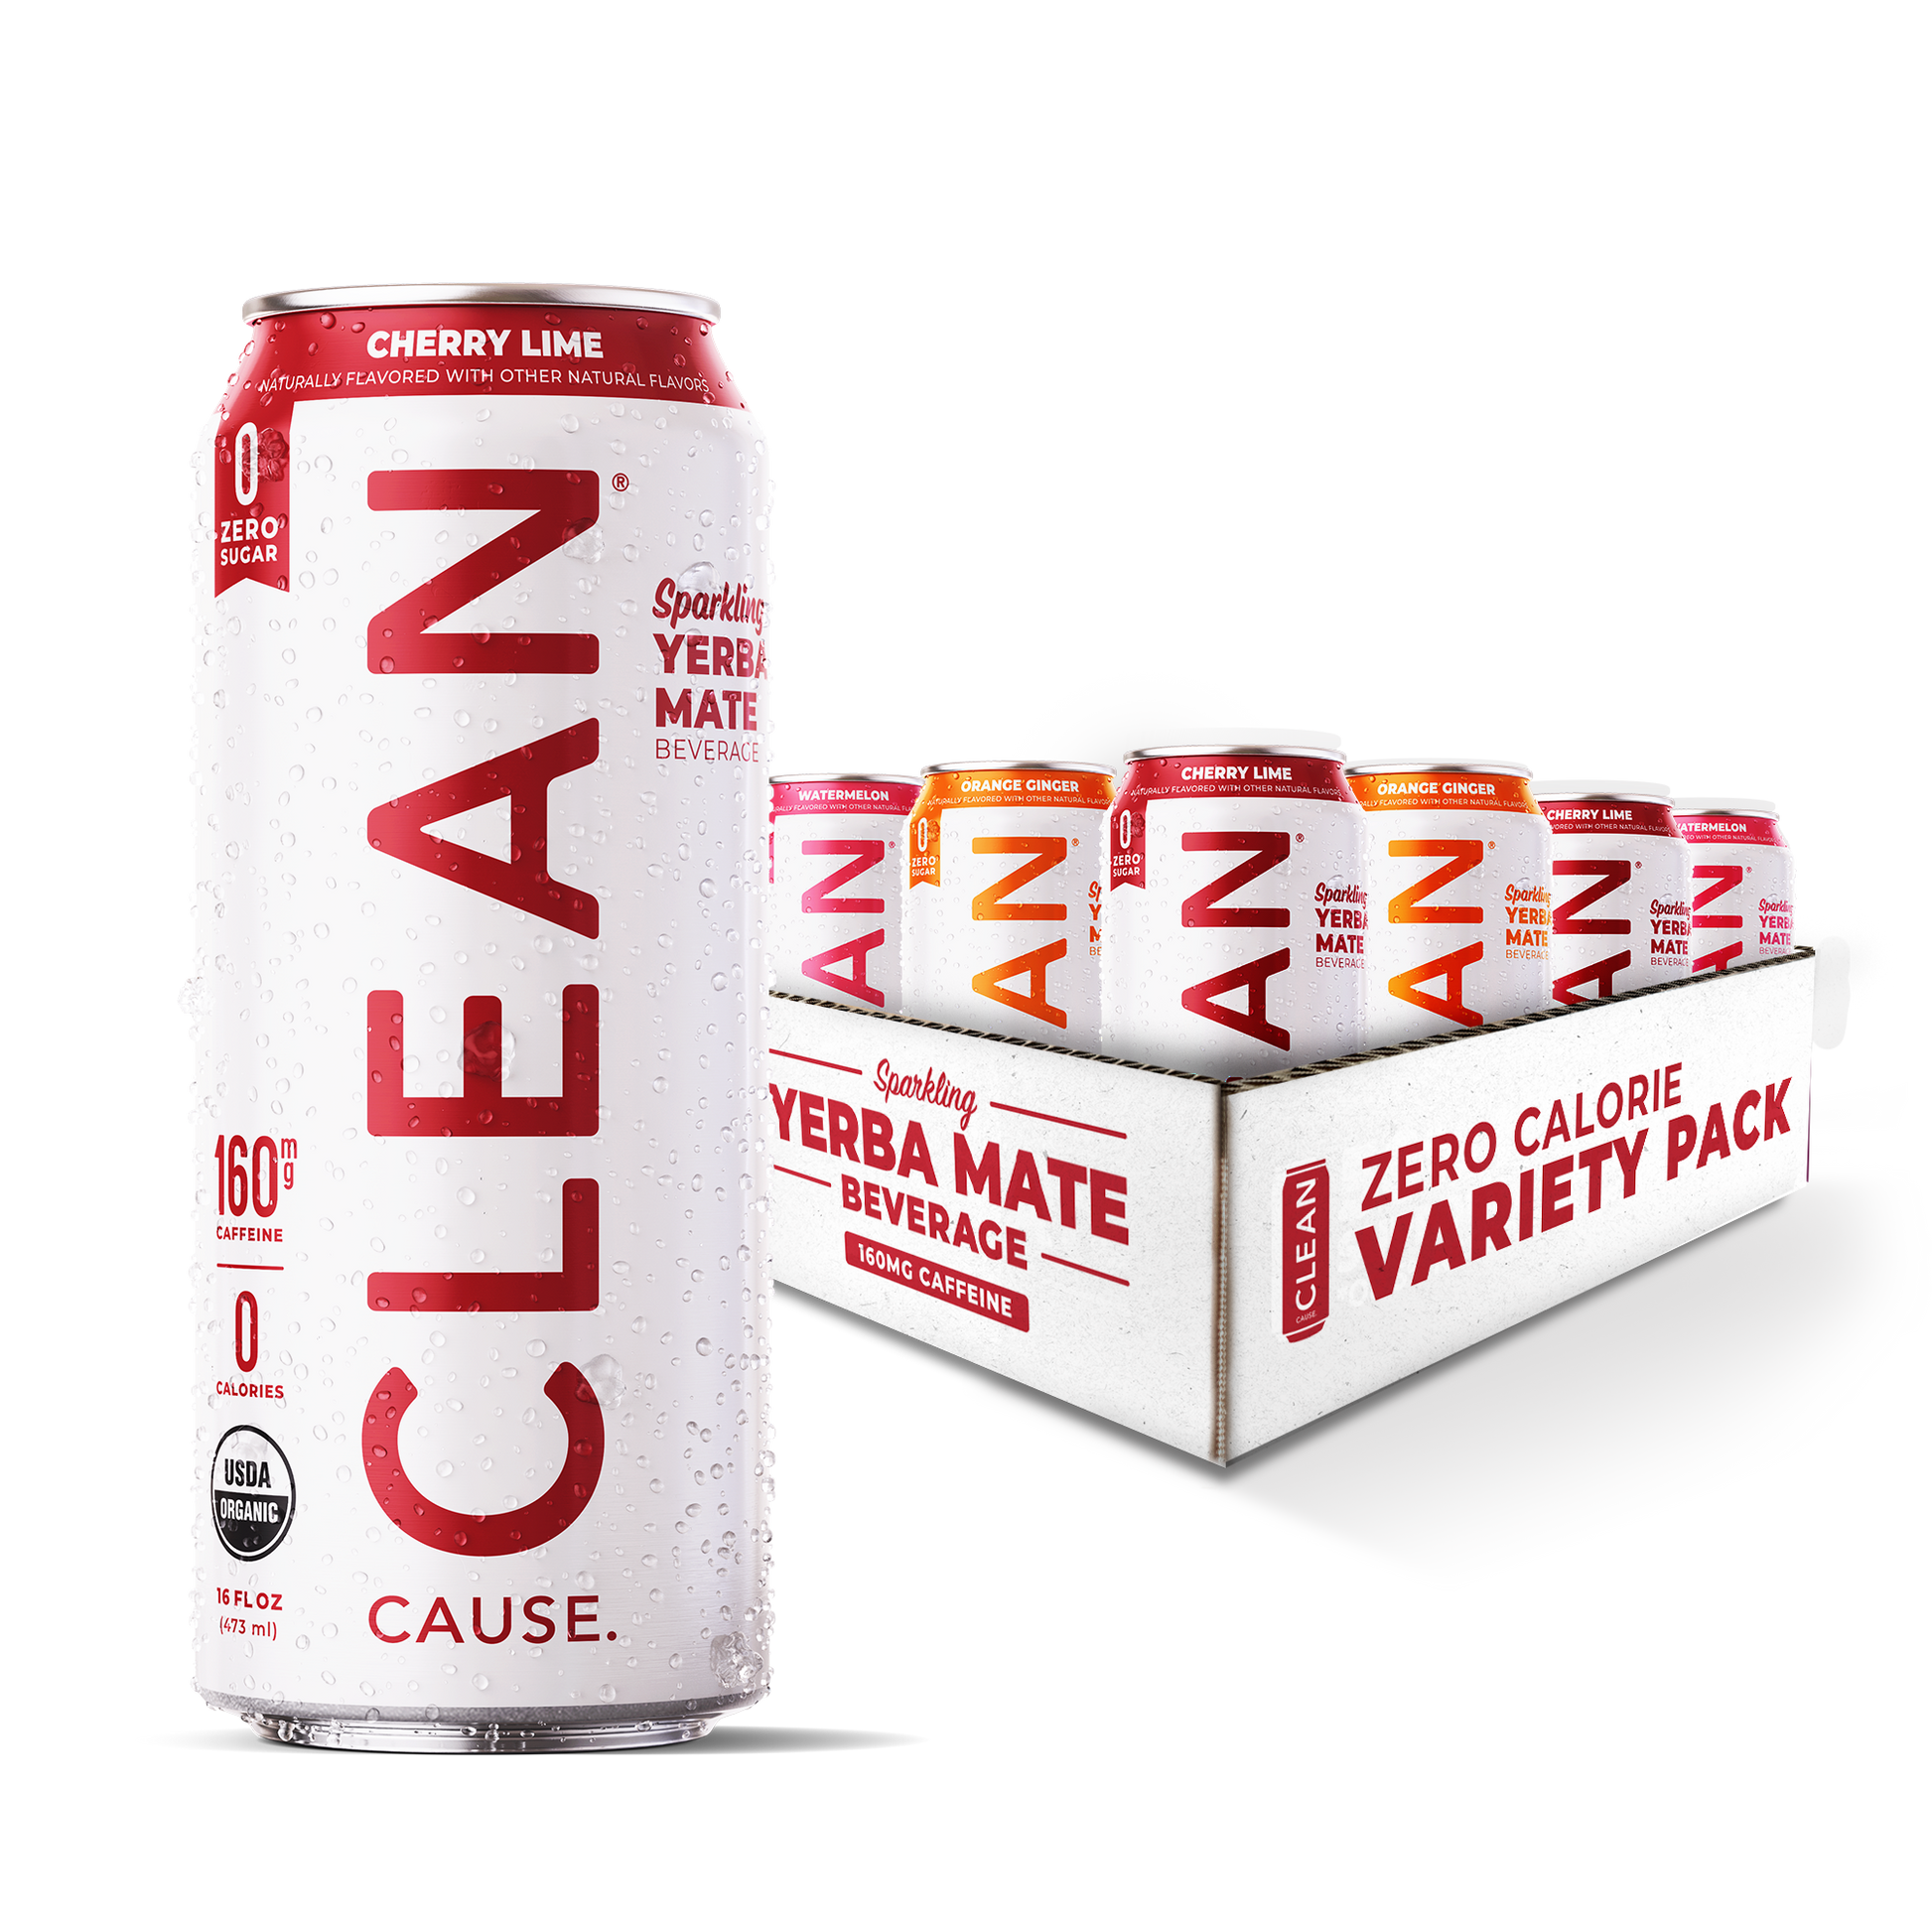 A cherry lime zero sugar CLEAN can in the foreground with a twelve pack of zero sugar variety pack in the background